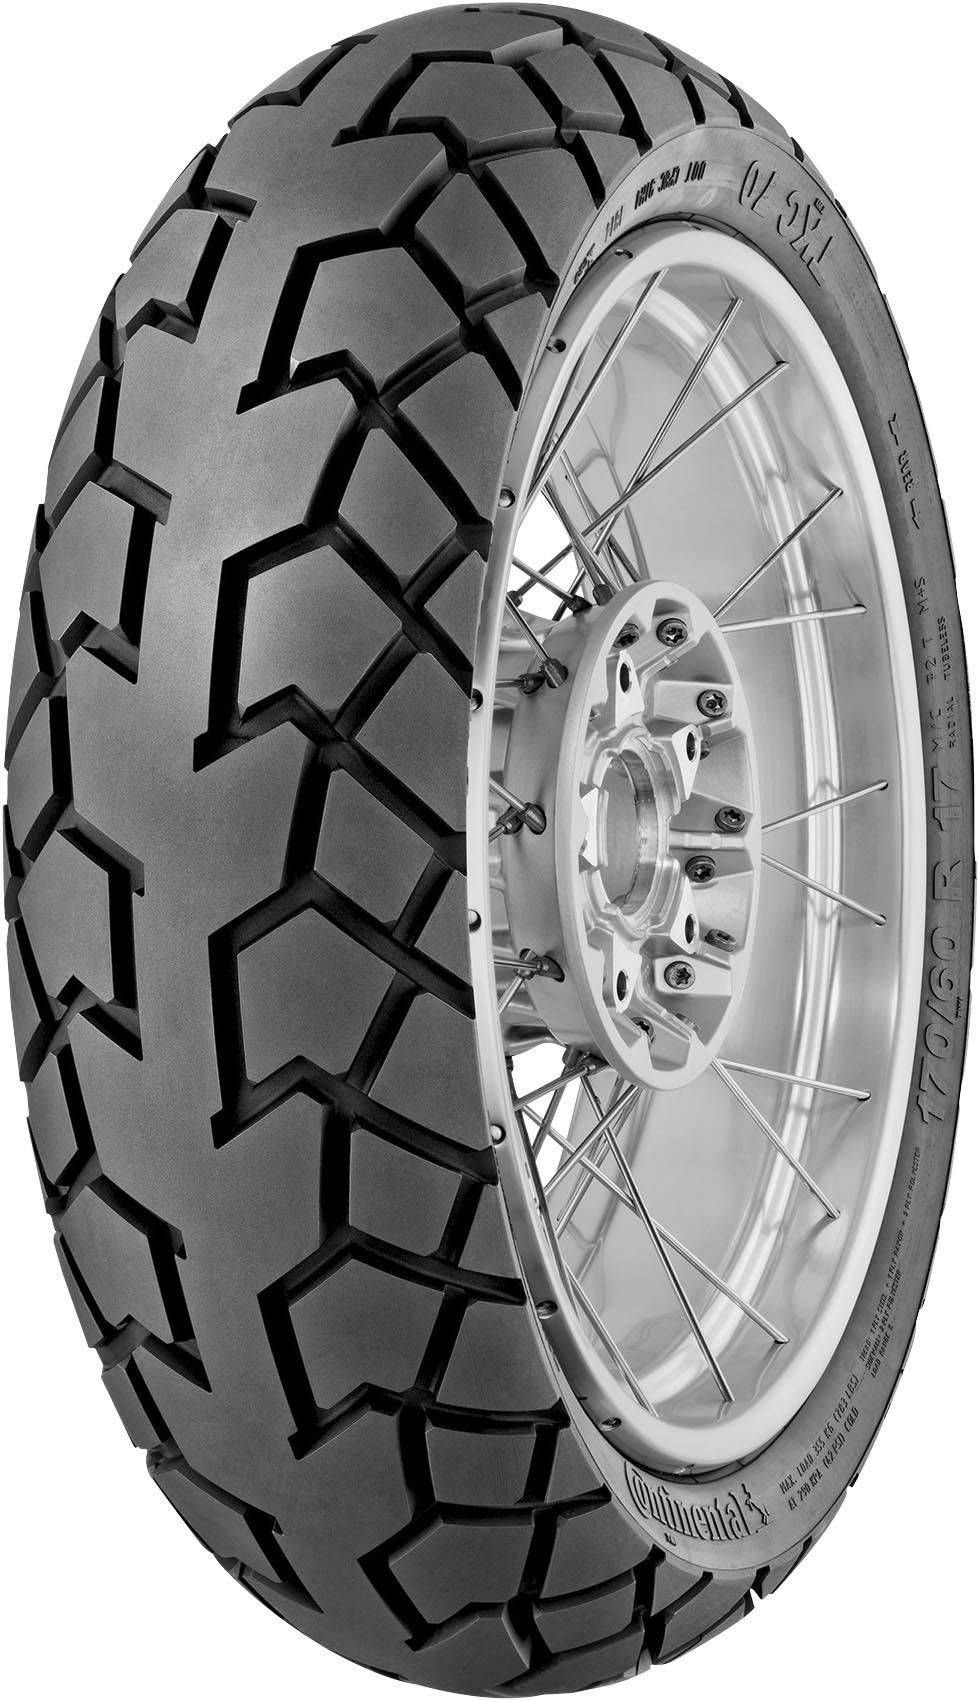 product_type-moto_tires CONTINENTAL TKC70R 150/70 R18 70S